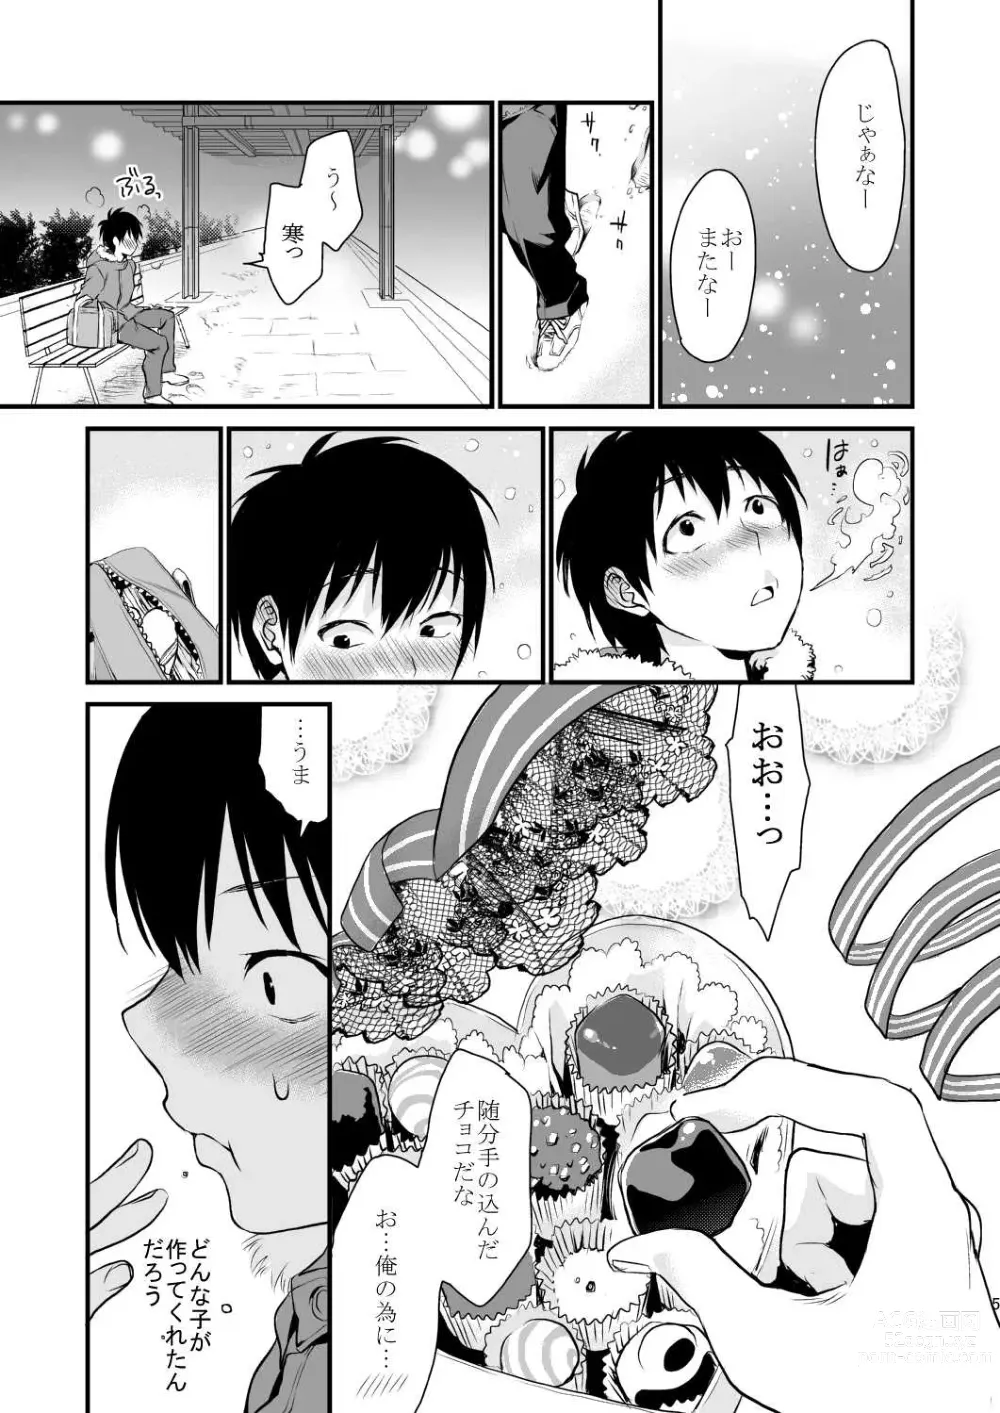 Page 4 of doujinshi Decorate